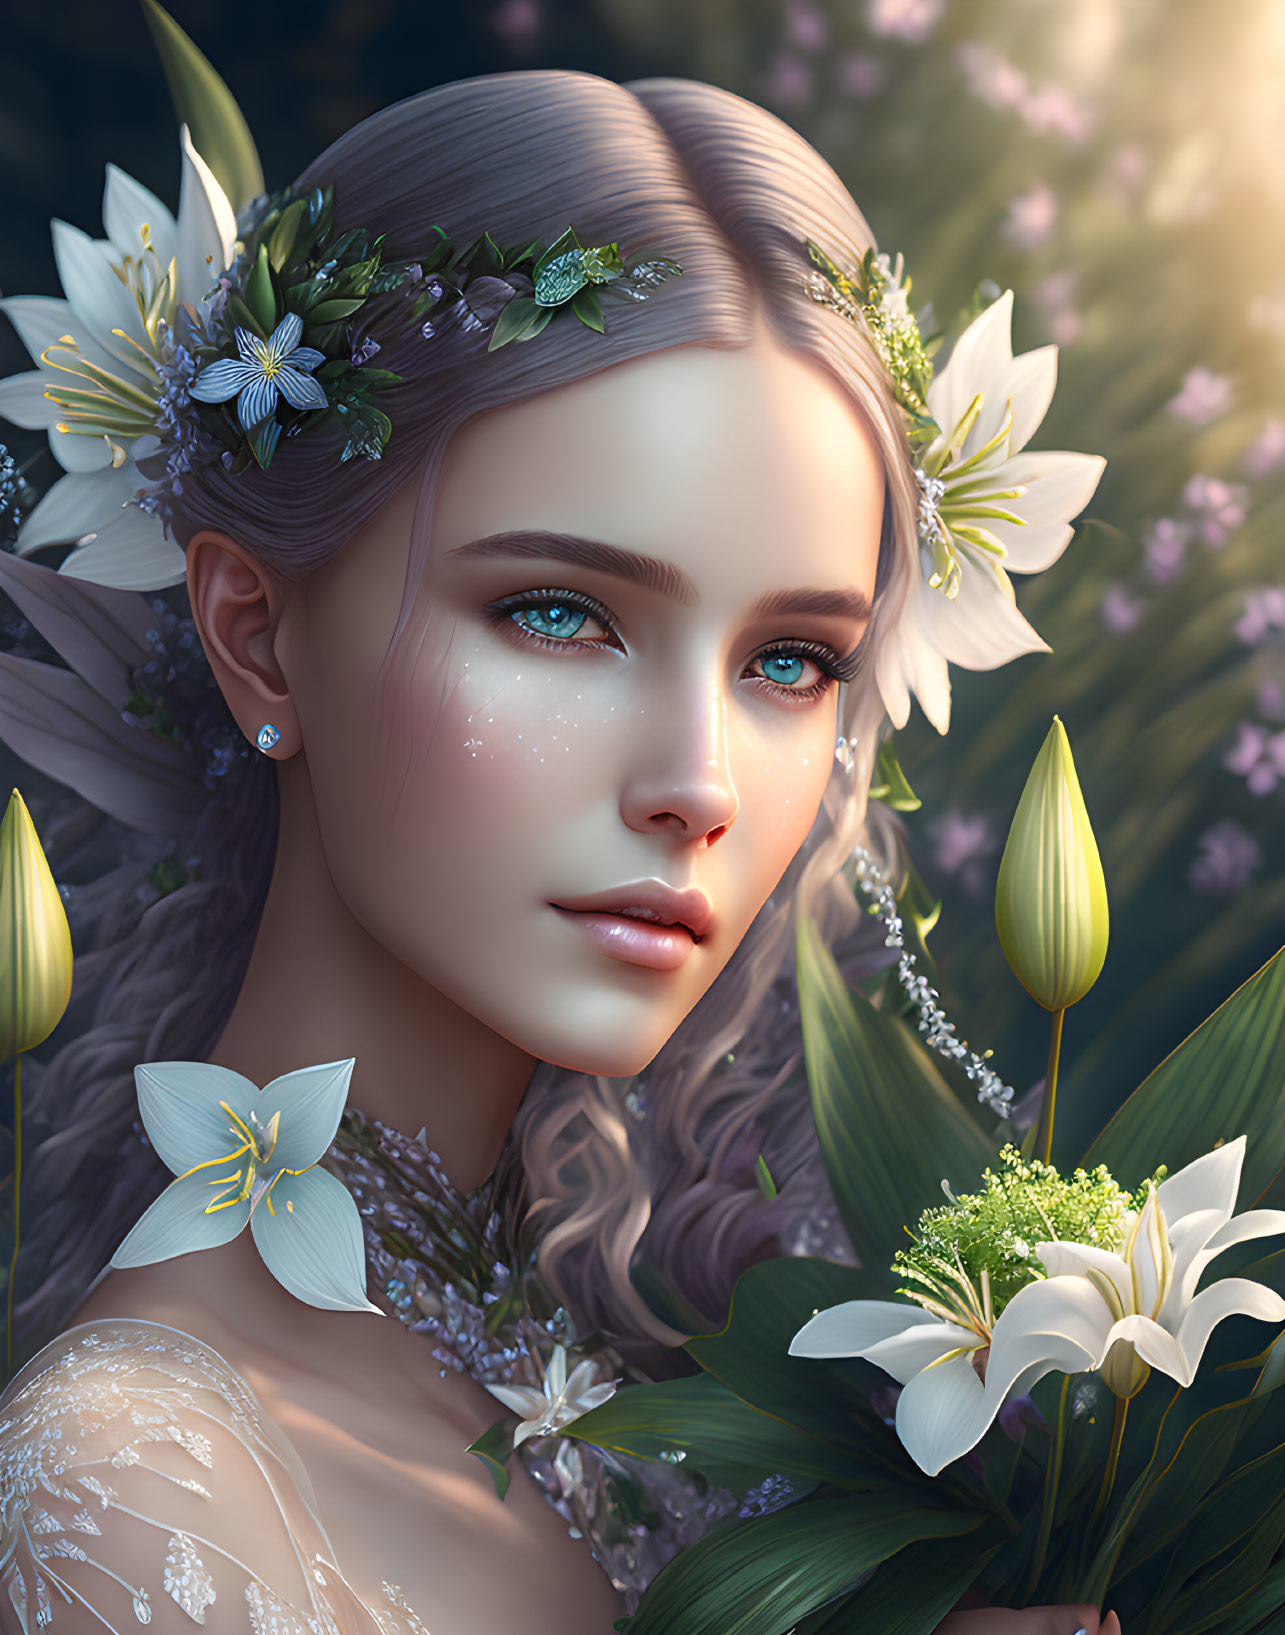 Ethereal woman with floral headpiece in fantasy digital art